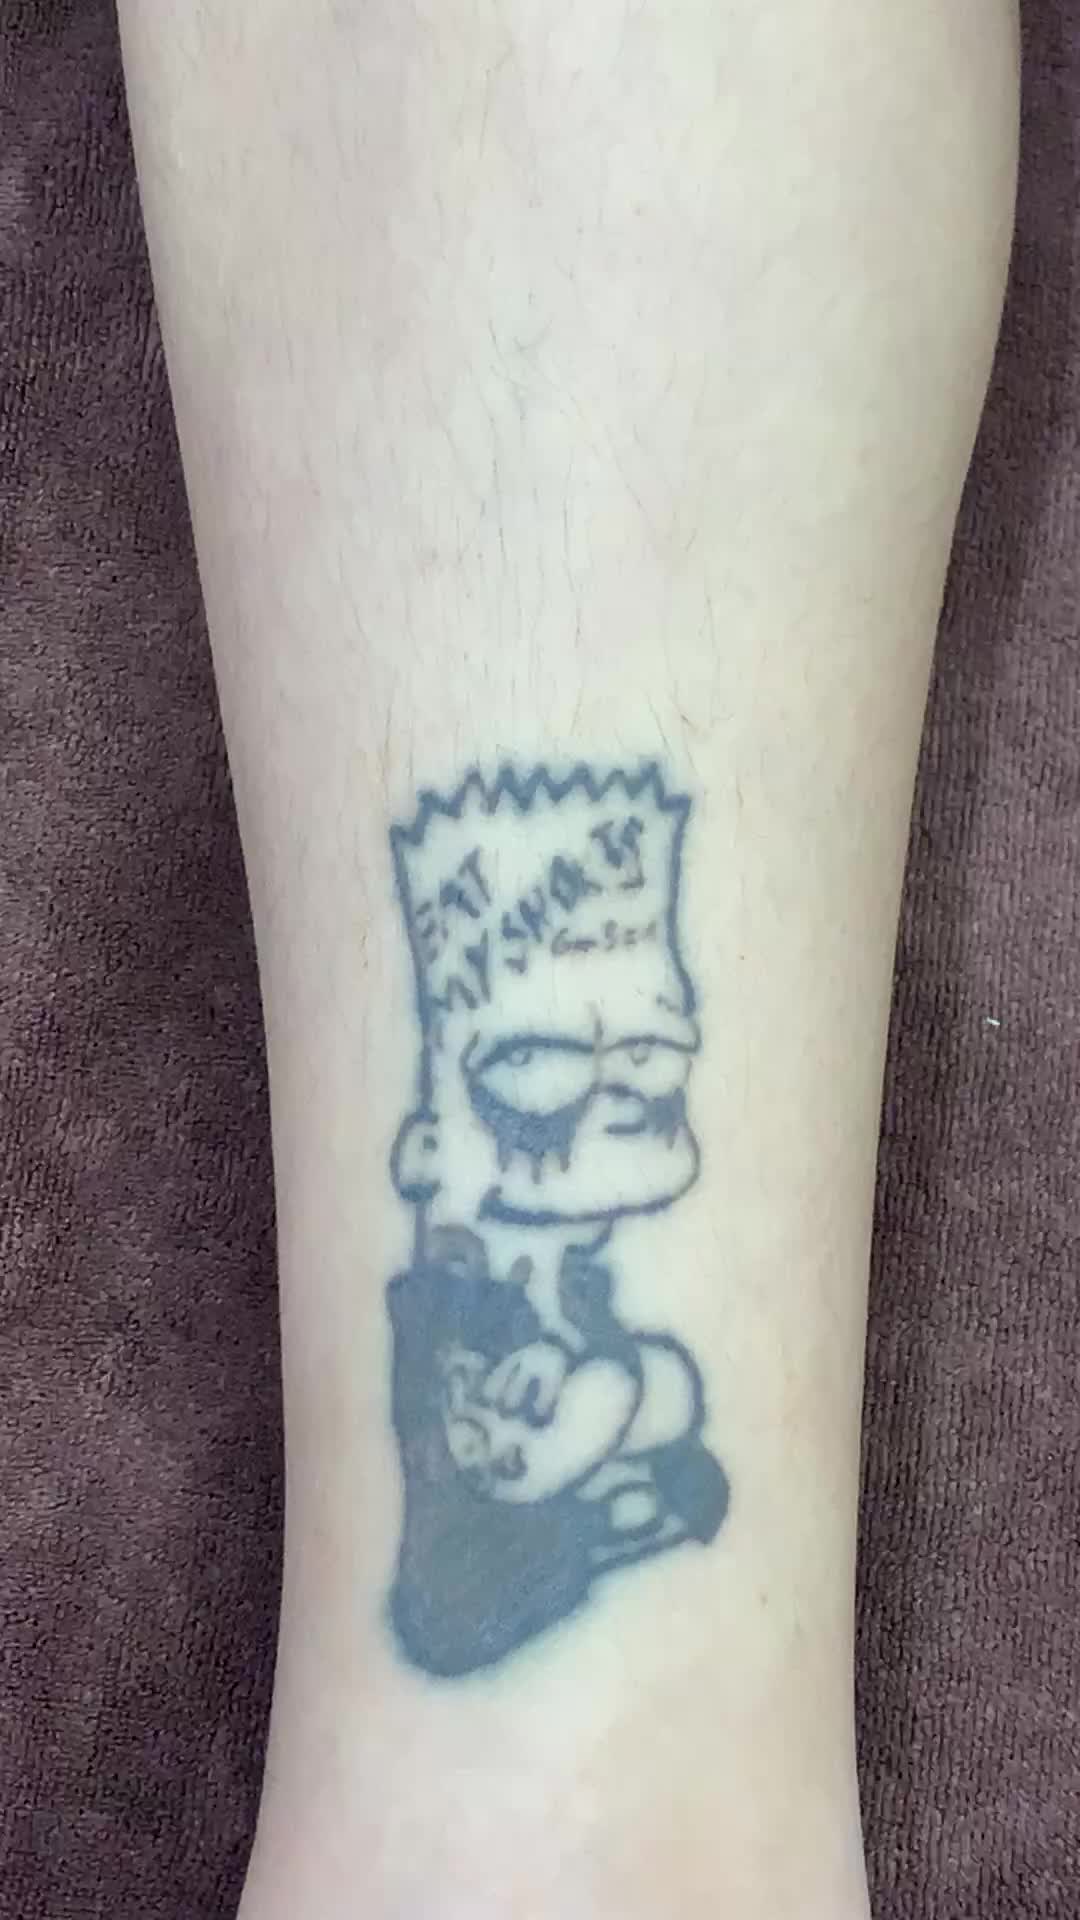 Bart Simpson tattoo on the tricep